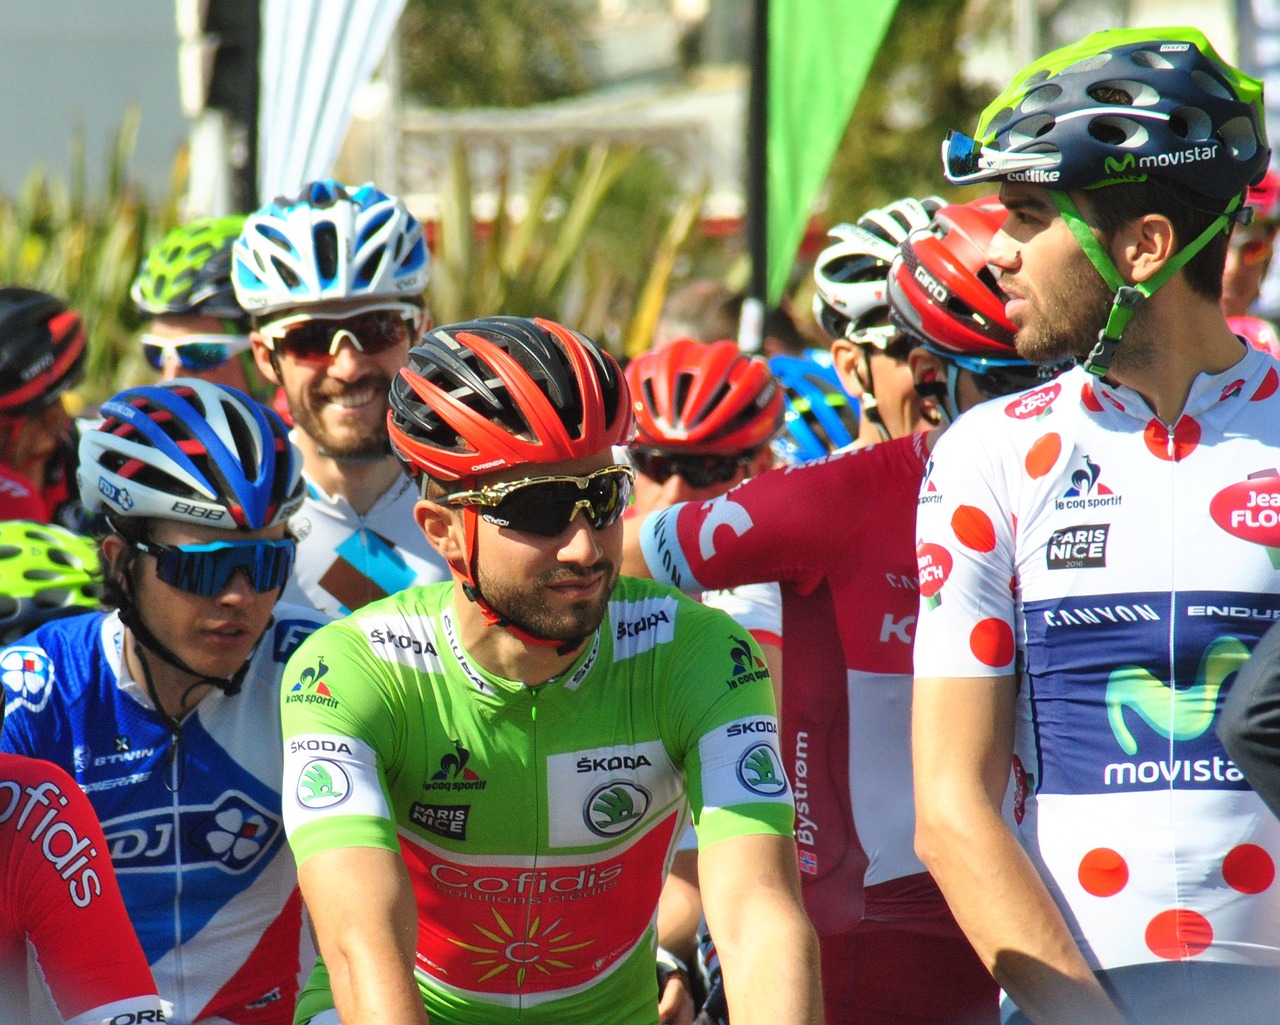 cycling races before the start sprinter jersey free photo